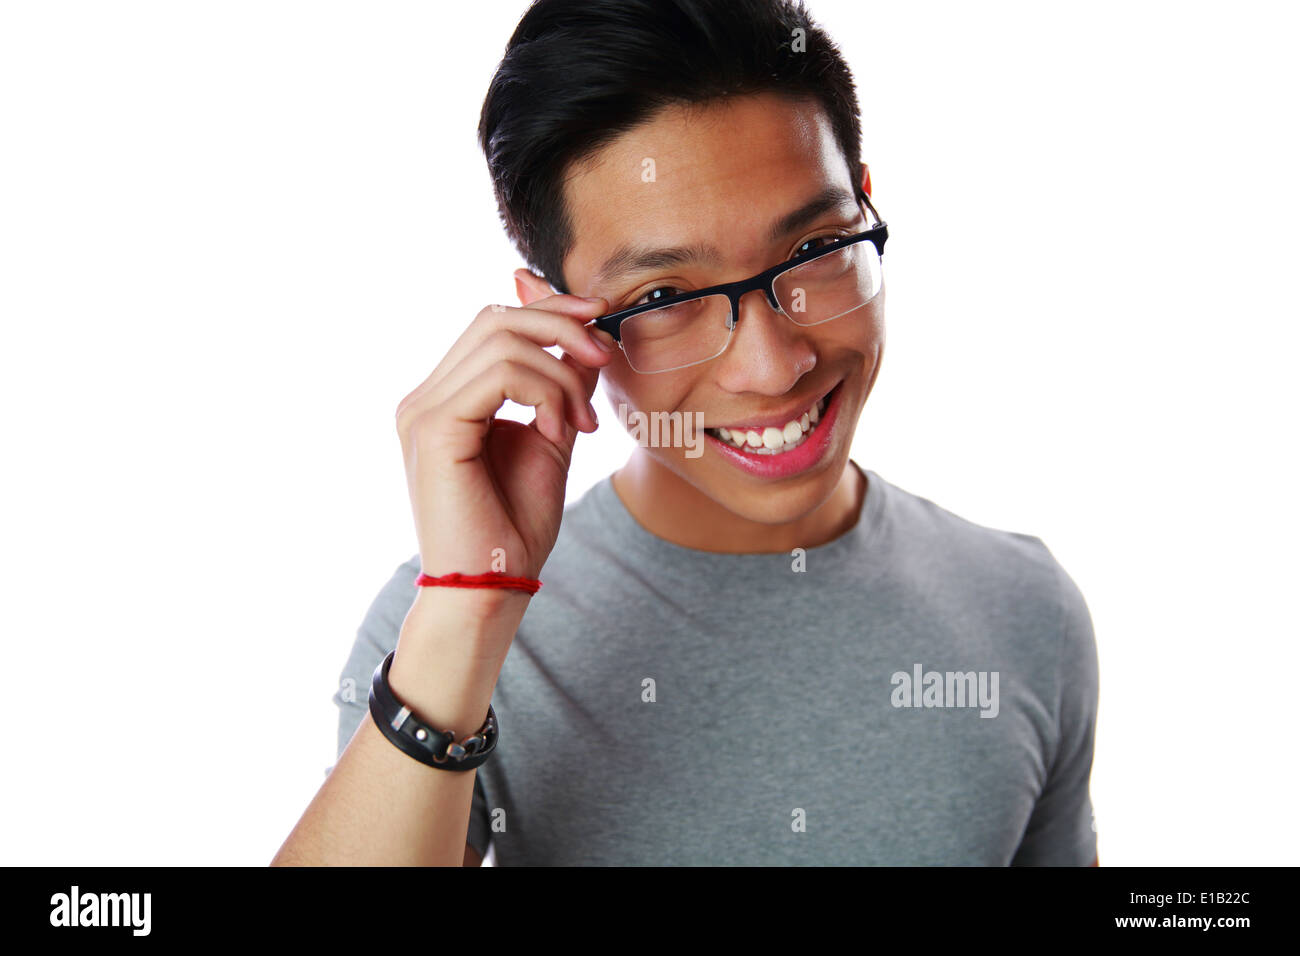 Portrait of a smiling asian man over white background Stock Photo